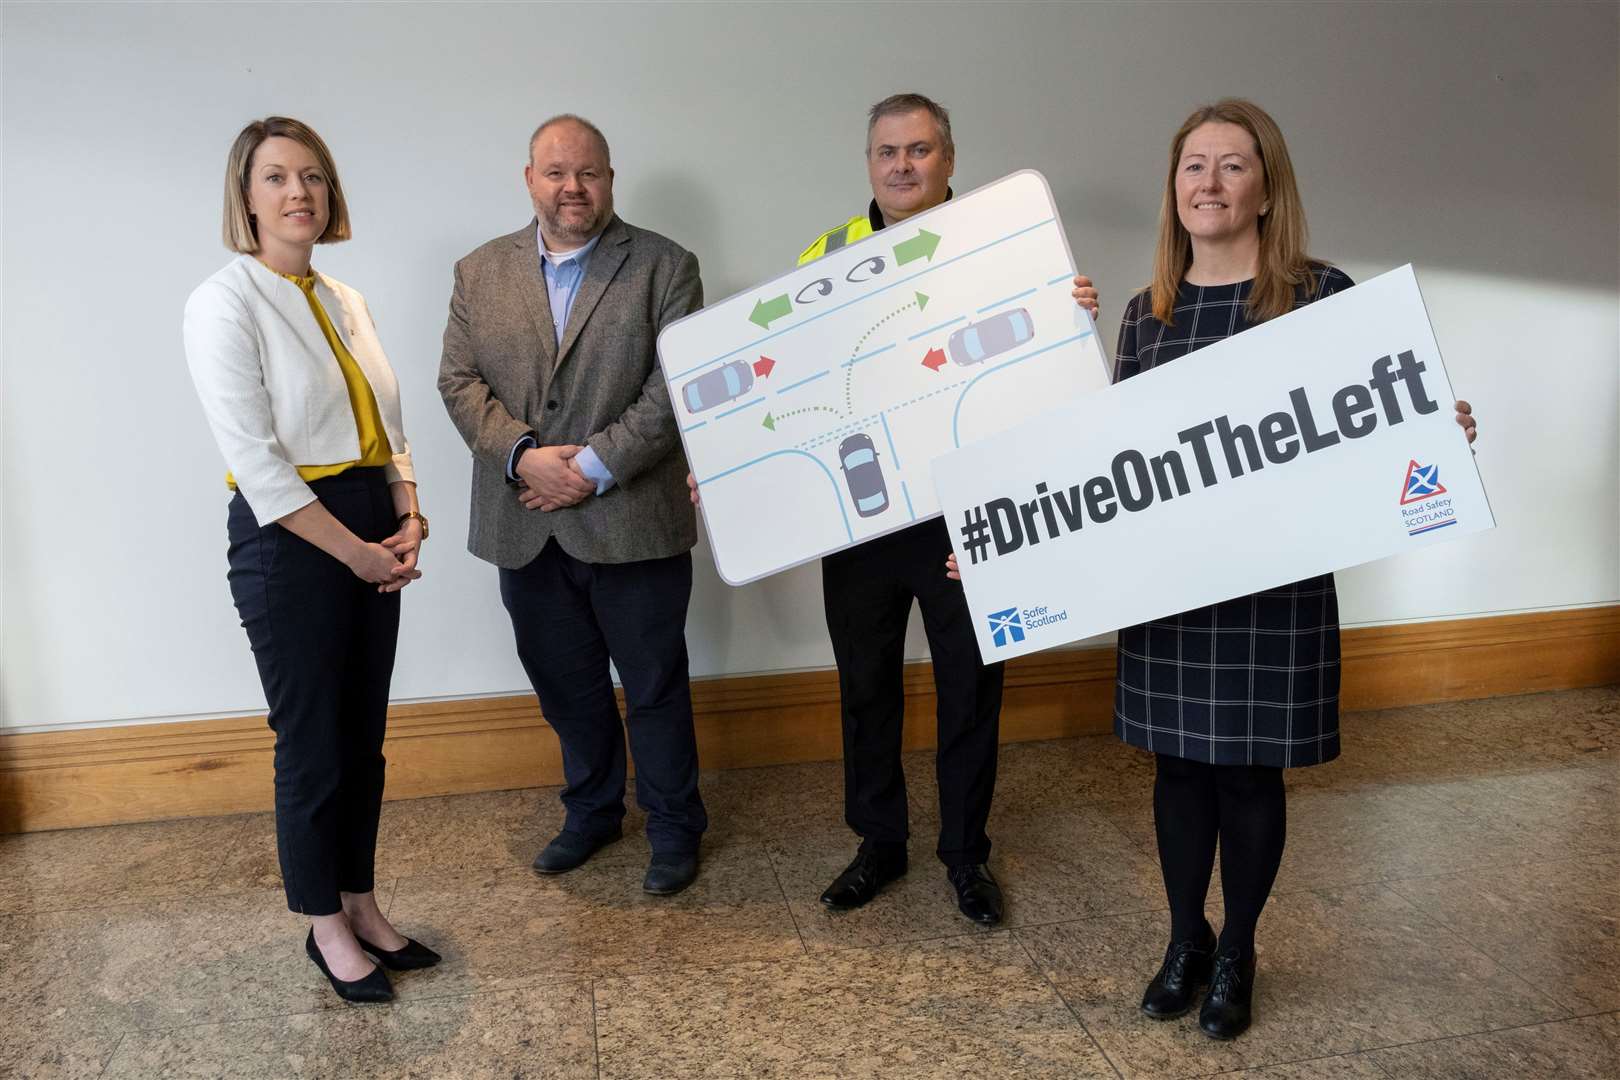 (From left) Minister for Transport Jenny Gilruth, Bruce Arell from Enterprise Holdings, Superintendent Stewart Mackie from Police Scotland and Margaret Spiers from Arnold Clark.